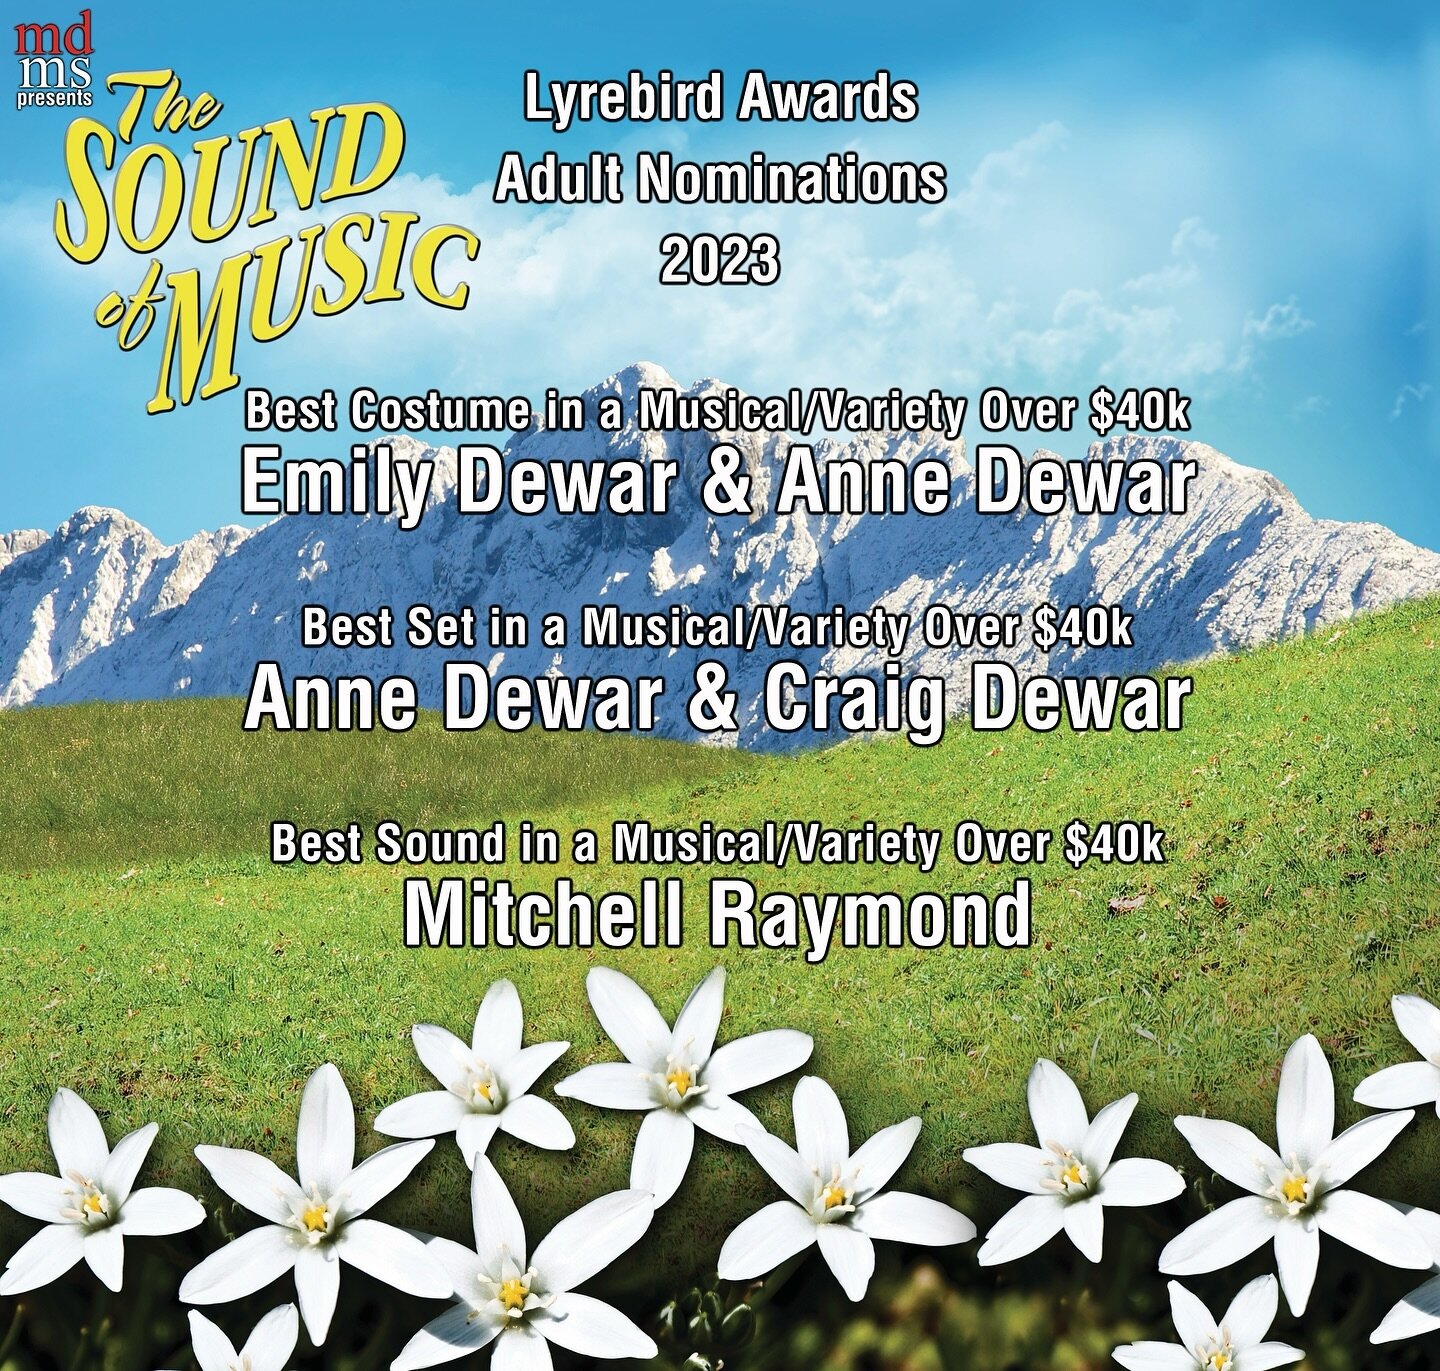 MDMS are happy to have received 3 nominations for our 2023 production of The Sound of Music!
Congratulations to all companies, production teams, and performers nominated 🎭 See you at the ceremony in March! 🎉 @lyrebird_awards